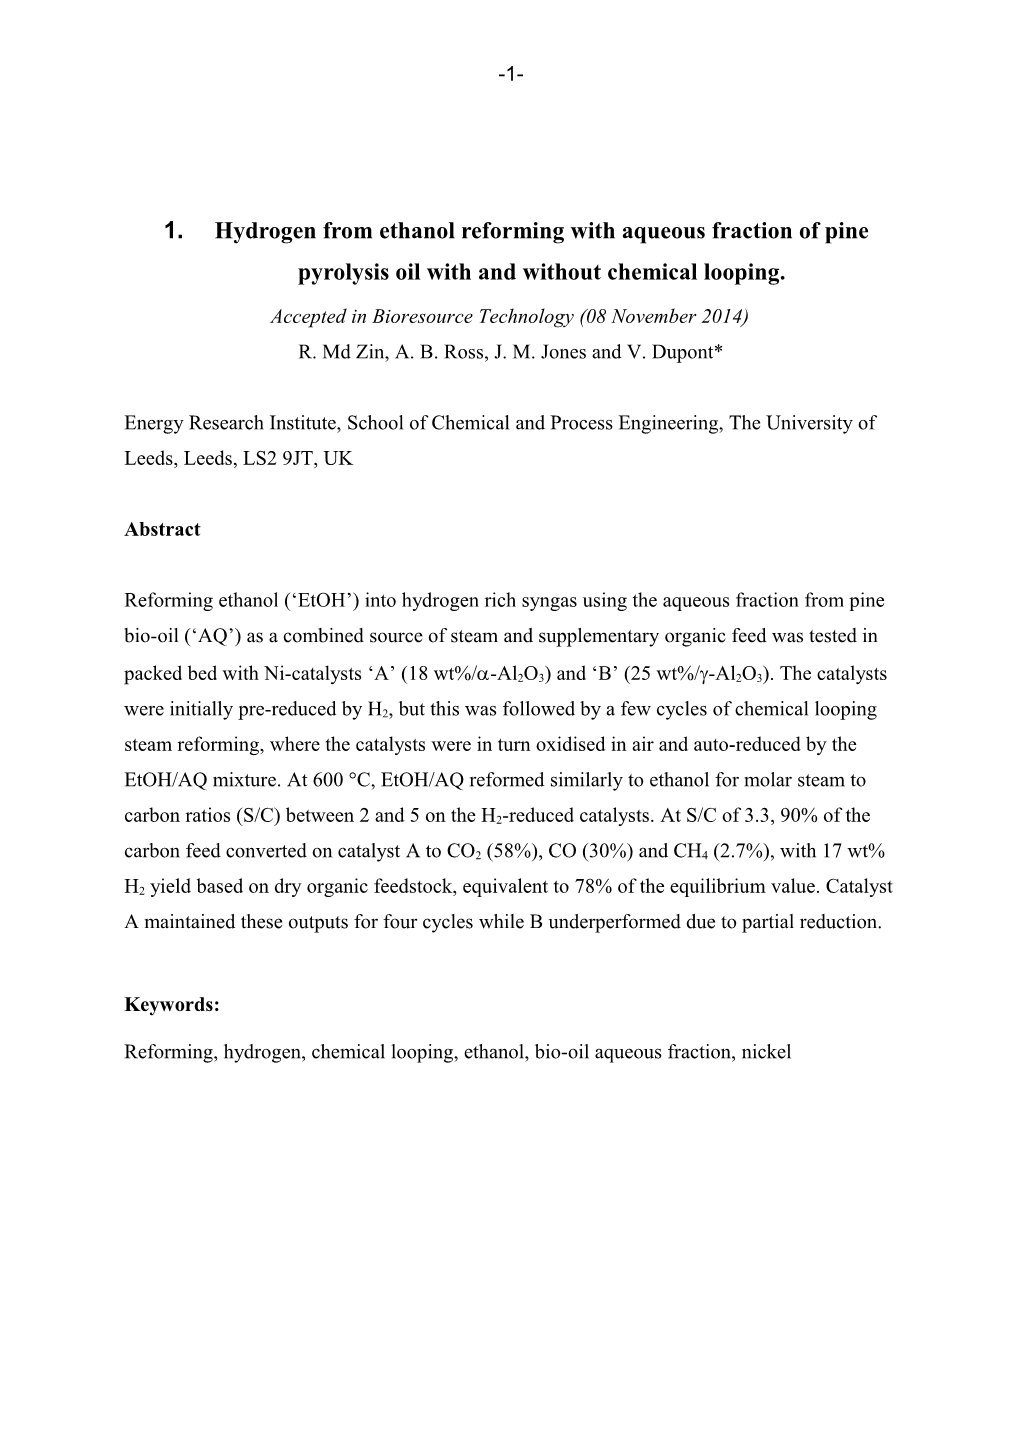 Hydrogen from Ethanol Reforming with Aqueous Fraction of Pine Pyrolysis Oil with and Without